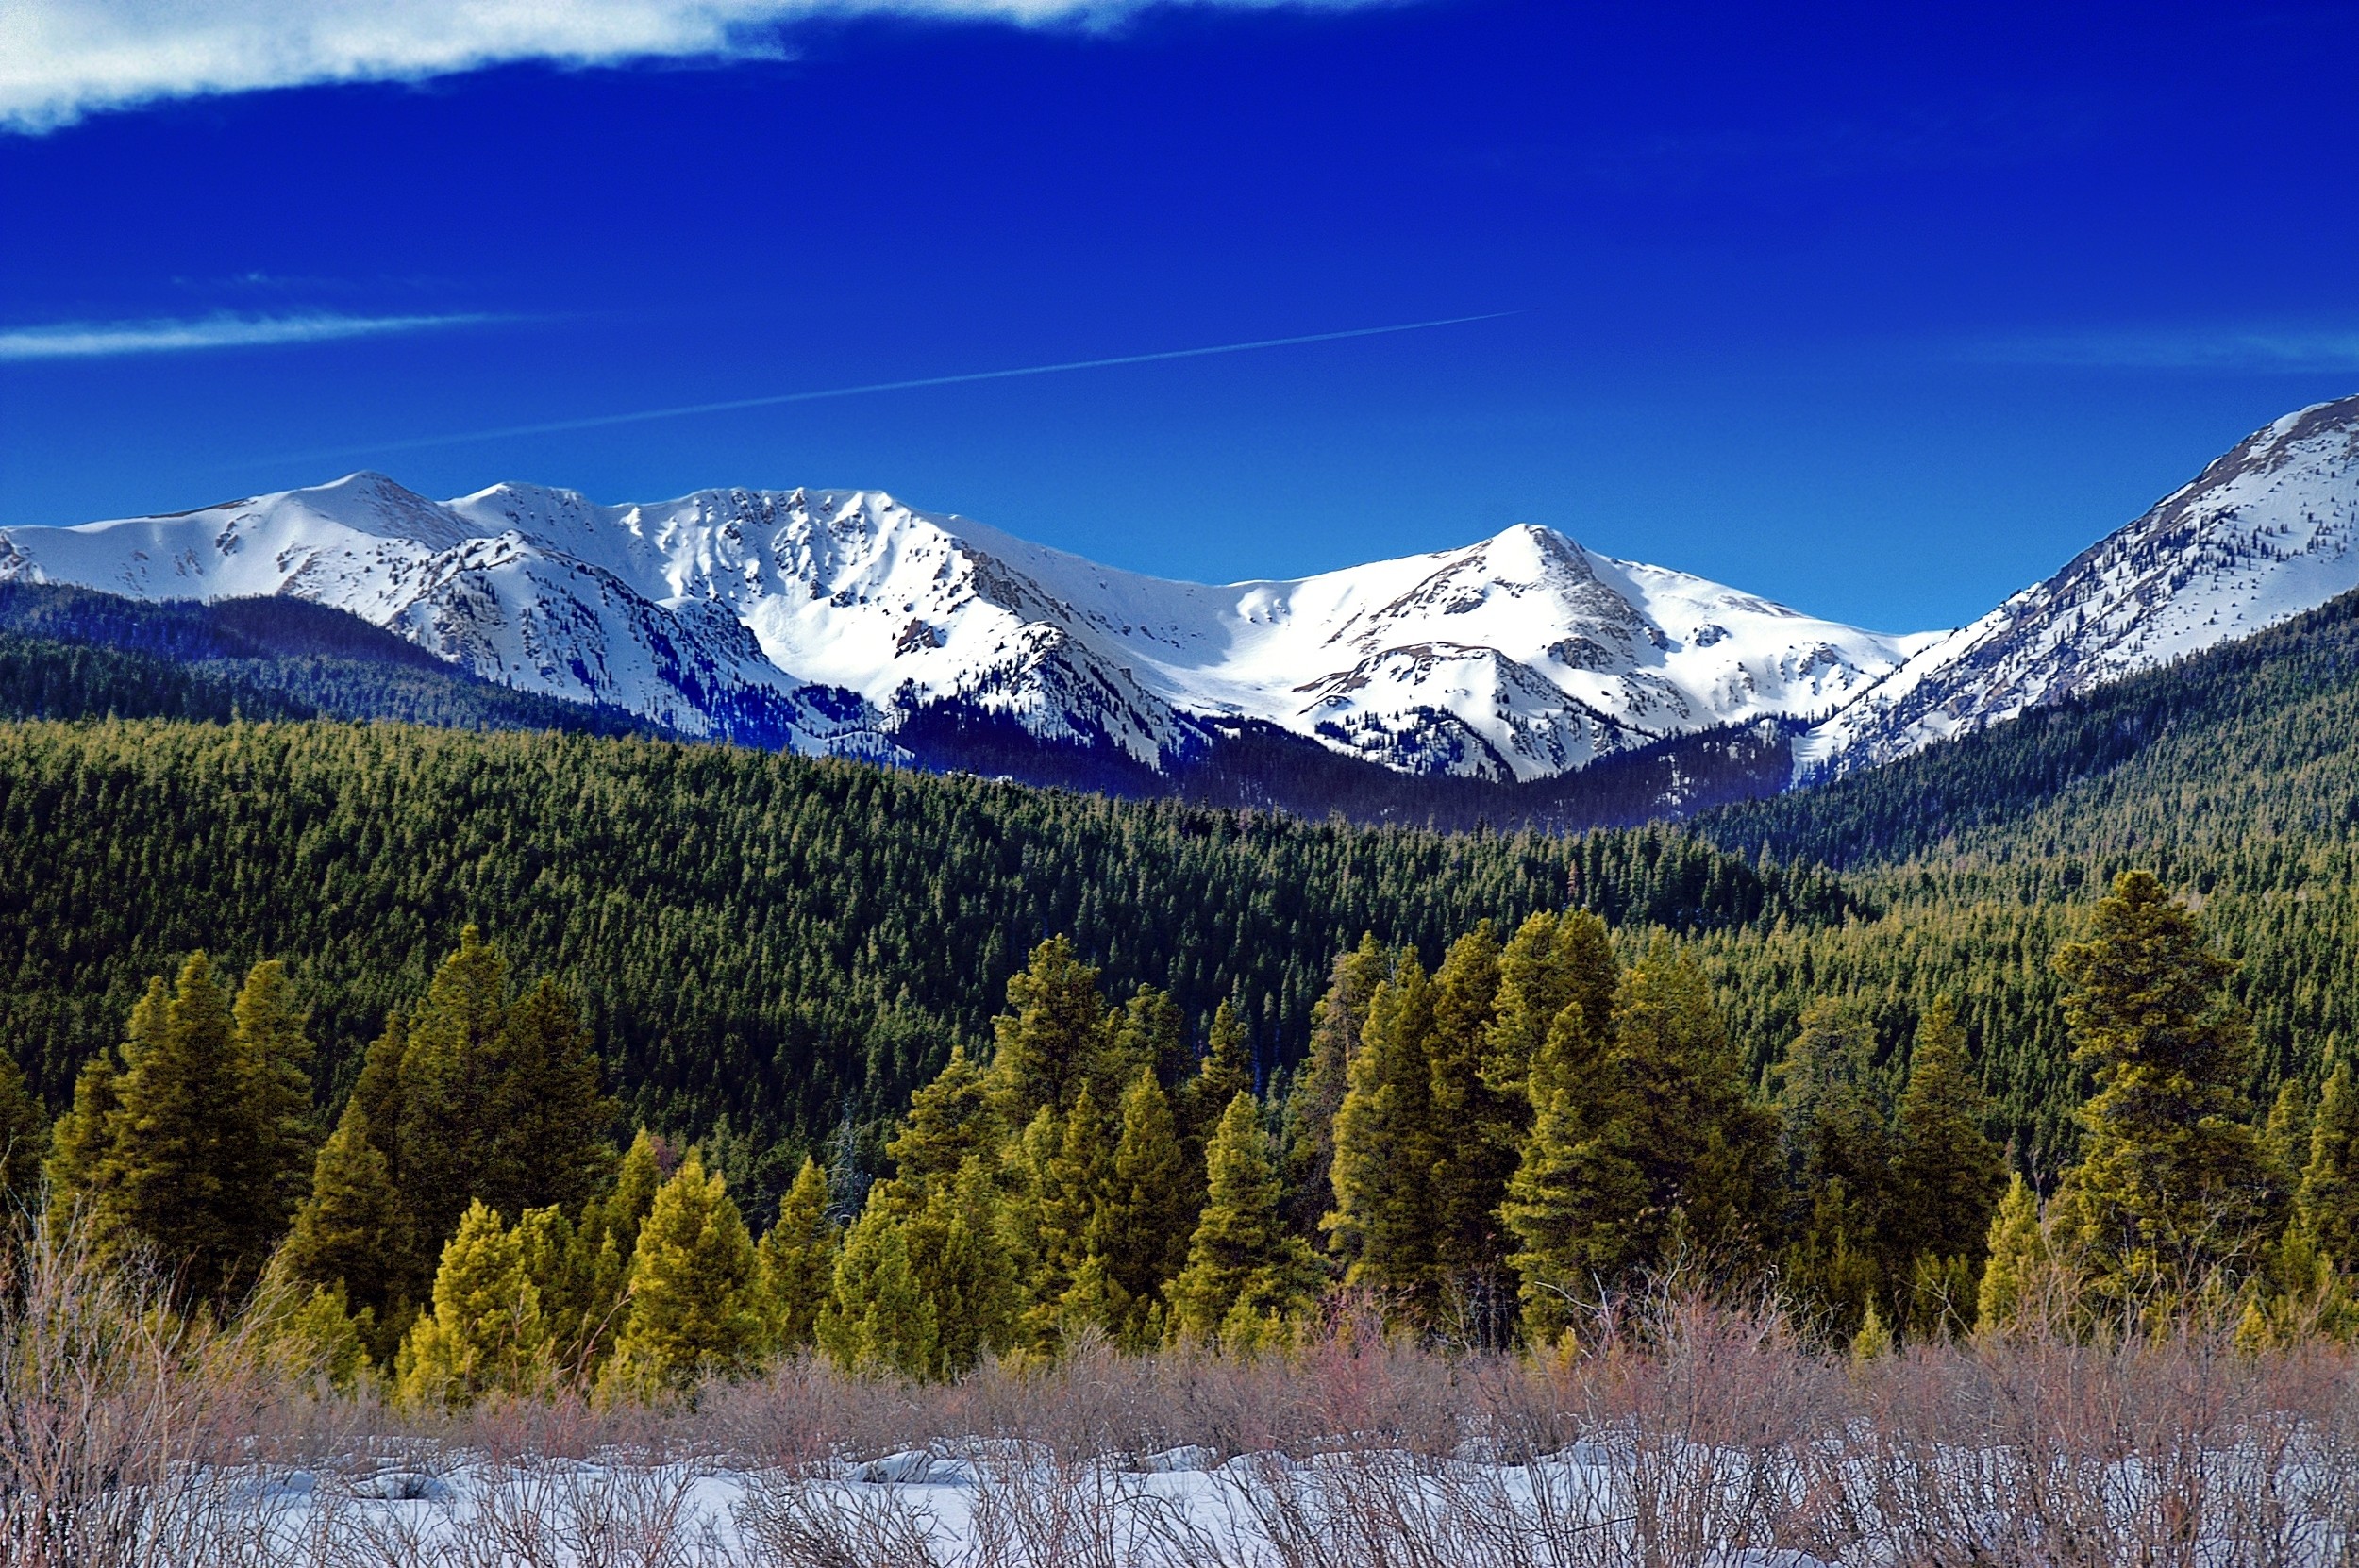 Winter Mountains and Forest in Colorado